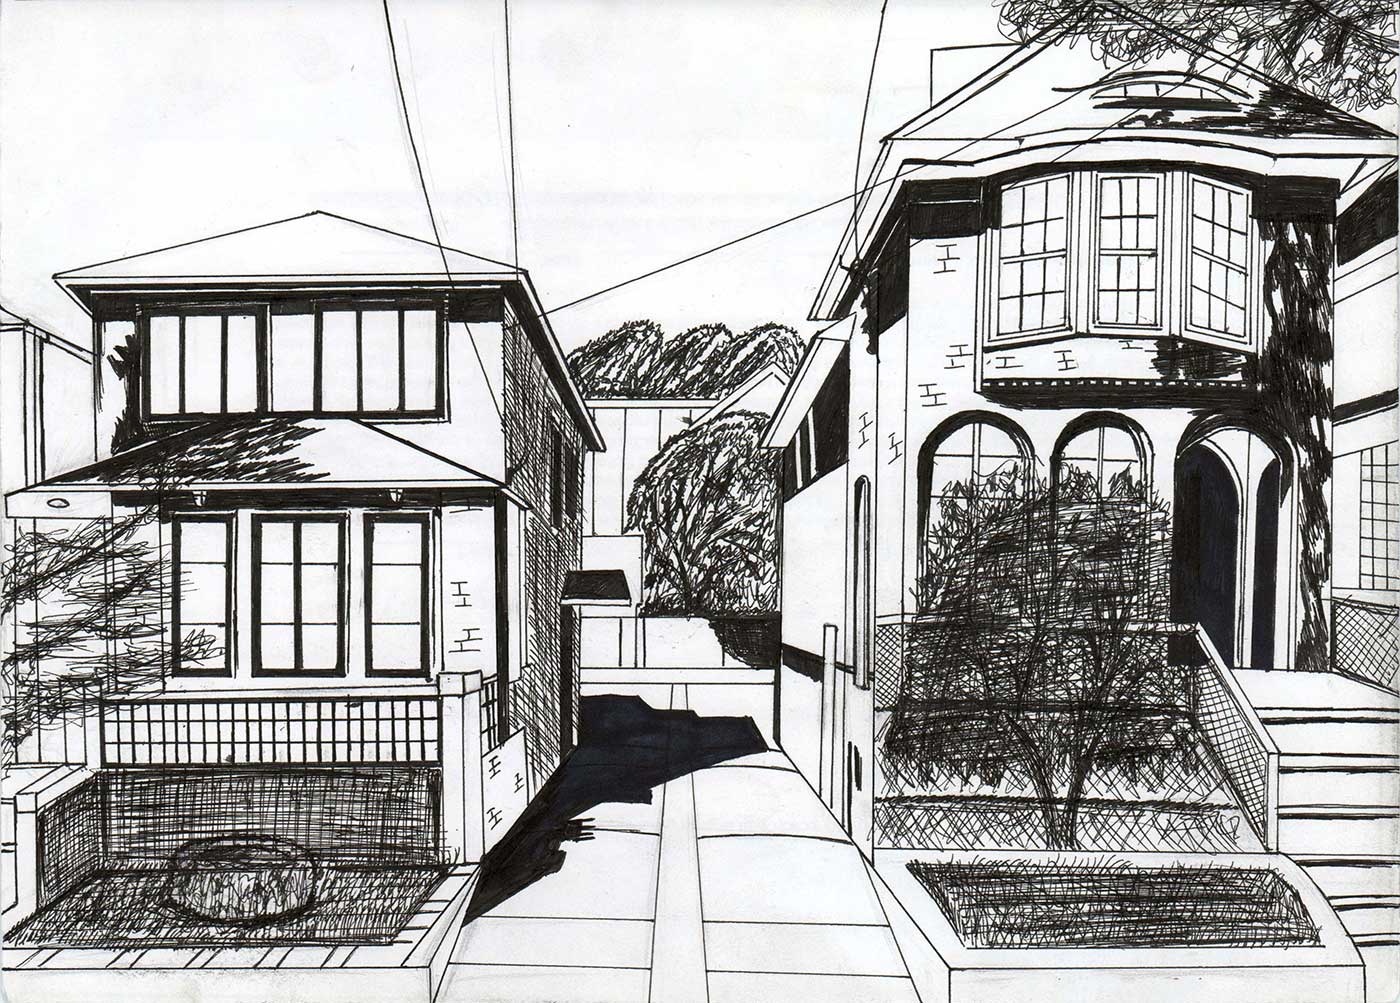 Black and white drawing of the front view of two houses with a drive-through in between.